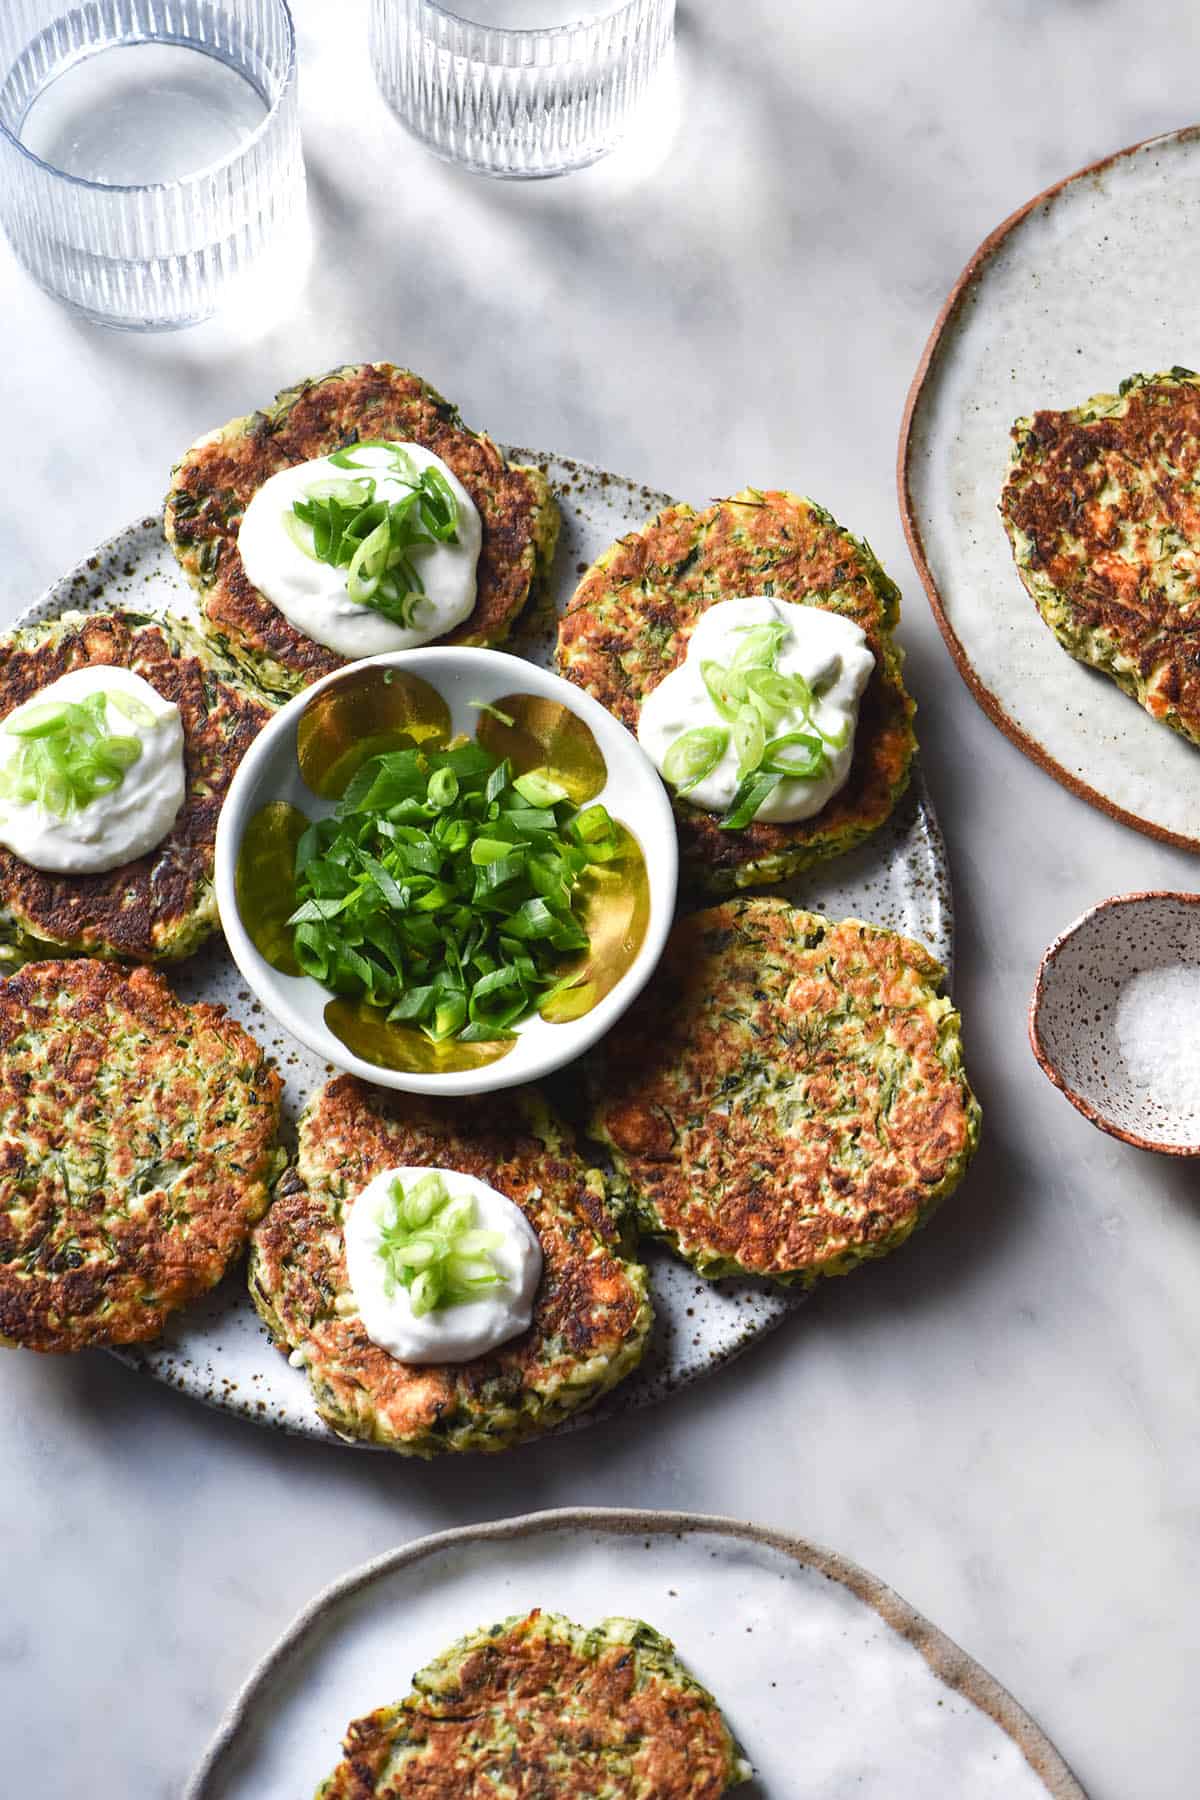 An aerial image of gluten free zucchini fritters on a white speckled ceramic plate atop a white marble table. Some of the fritters are topped with yoghurt and spring onion greens. A small bowl of spring onion greens sits in the centre of the plate, which is surrounded by extra plates of fritters, water glasses and a bit bowl of salt.